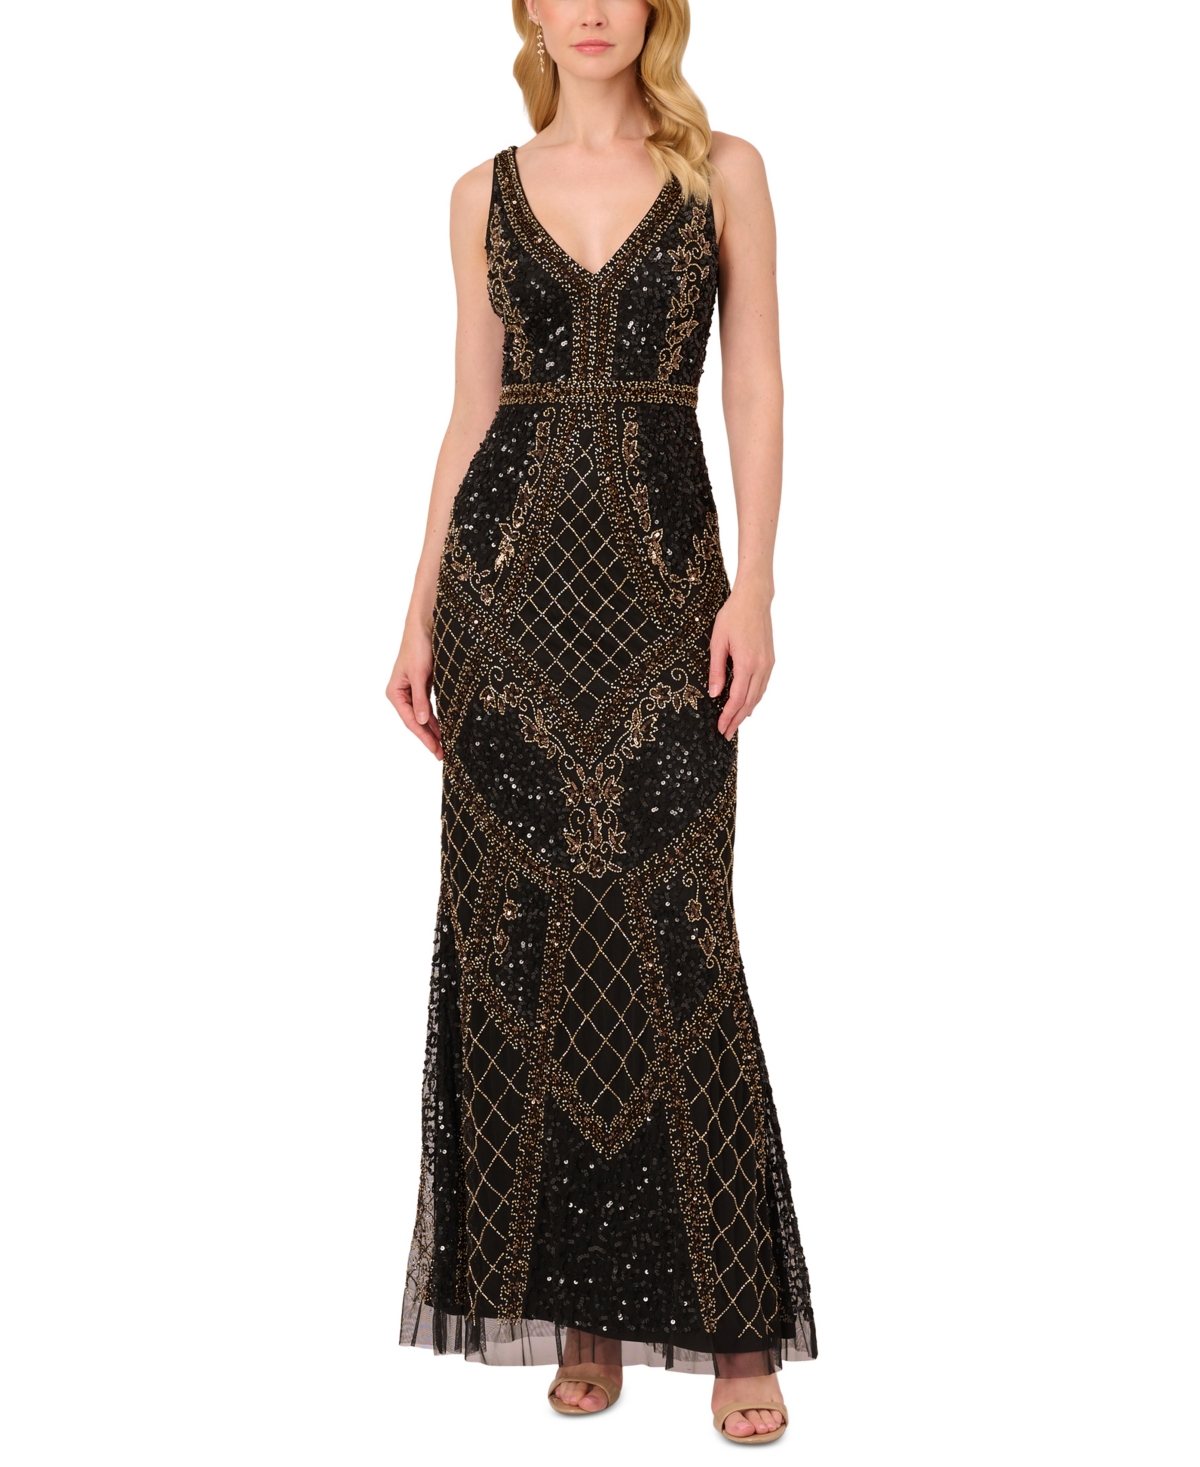 Best 1920s Prom Dresses – Great Gatsby Style Gowns Adrianna Papell Womens Beaded Mesh Column Gown - Black Gold $349.00 AT vintagedancer.com